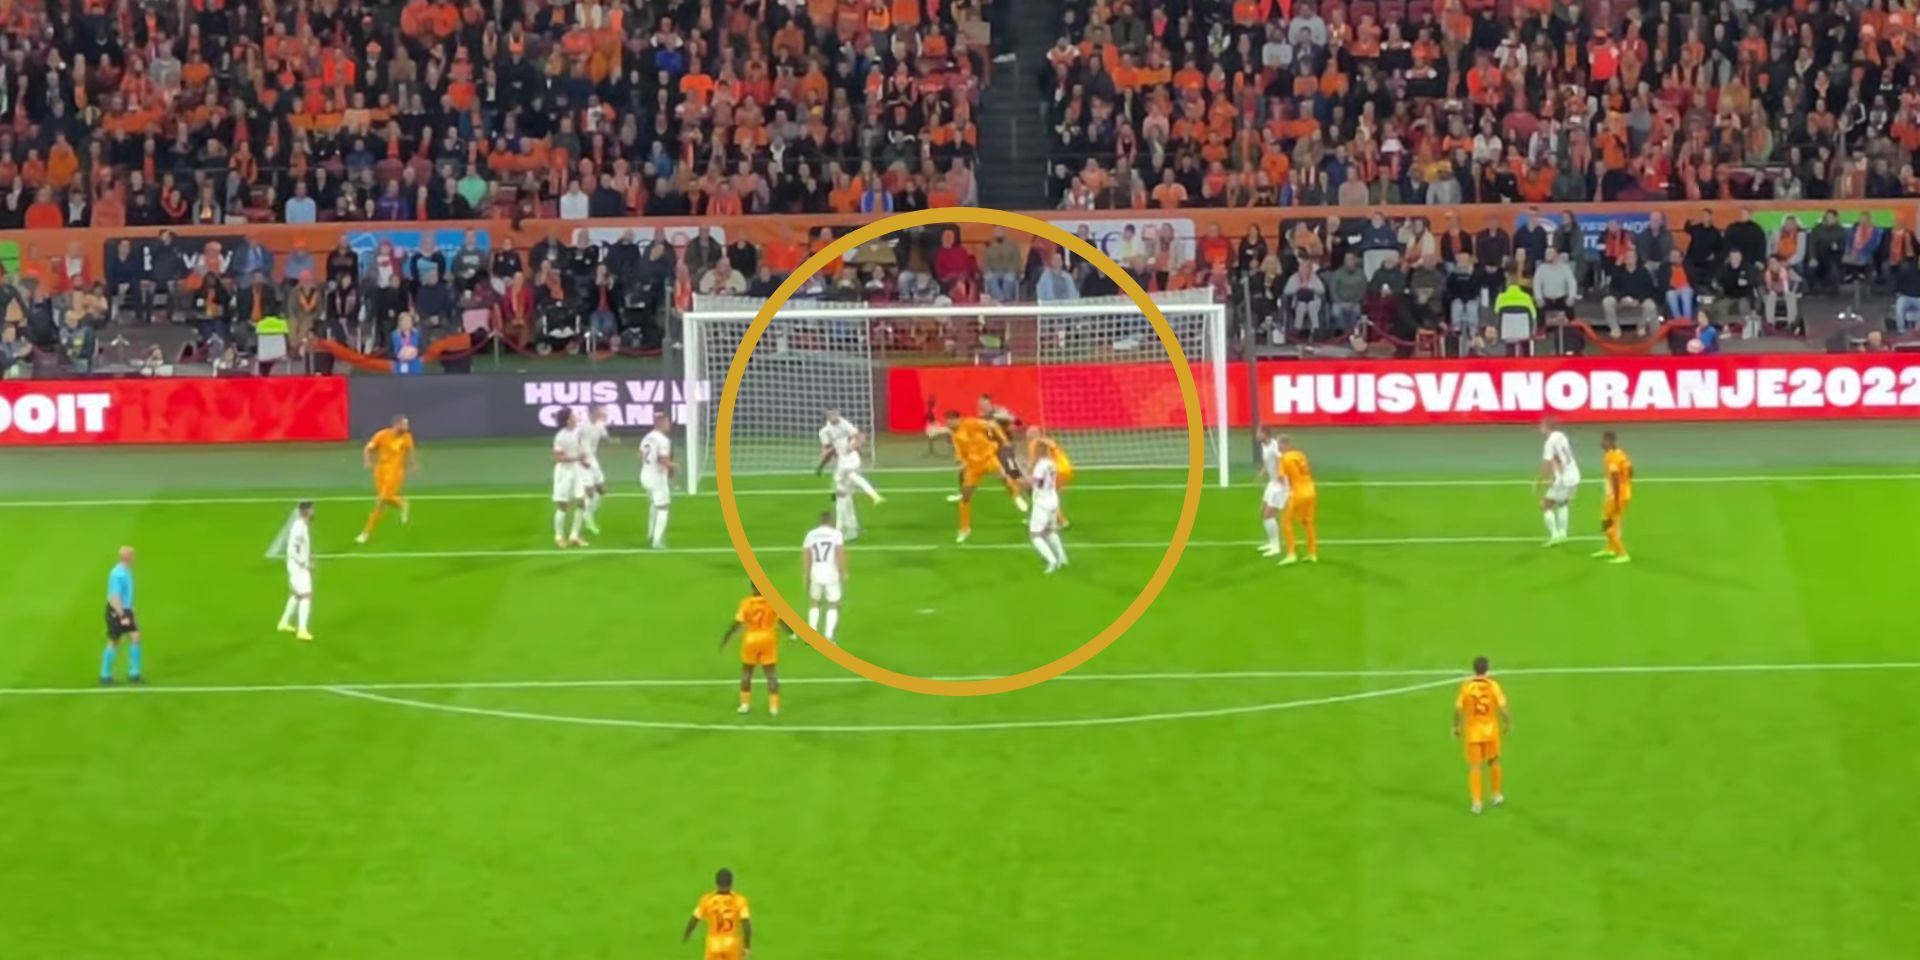 (Video) View from the stands as van Dijk gives Holland Nations League victory